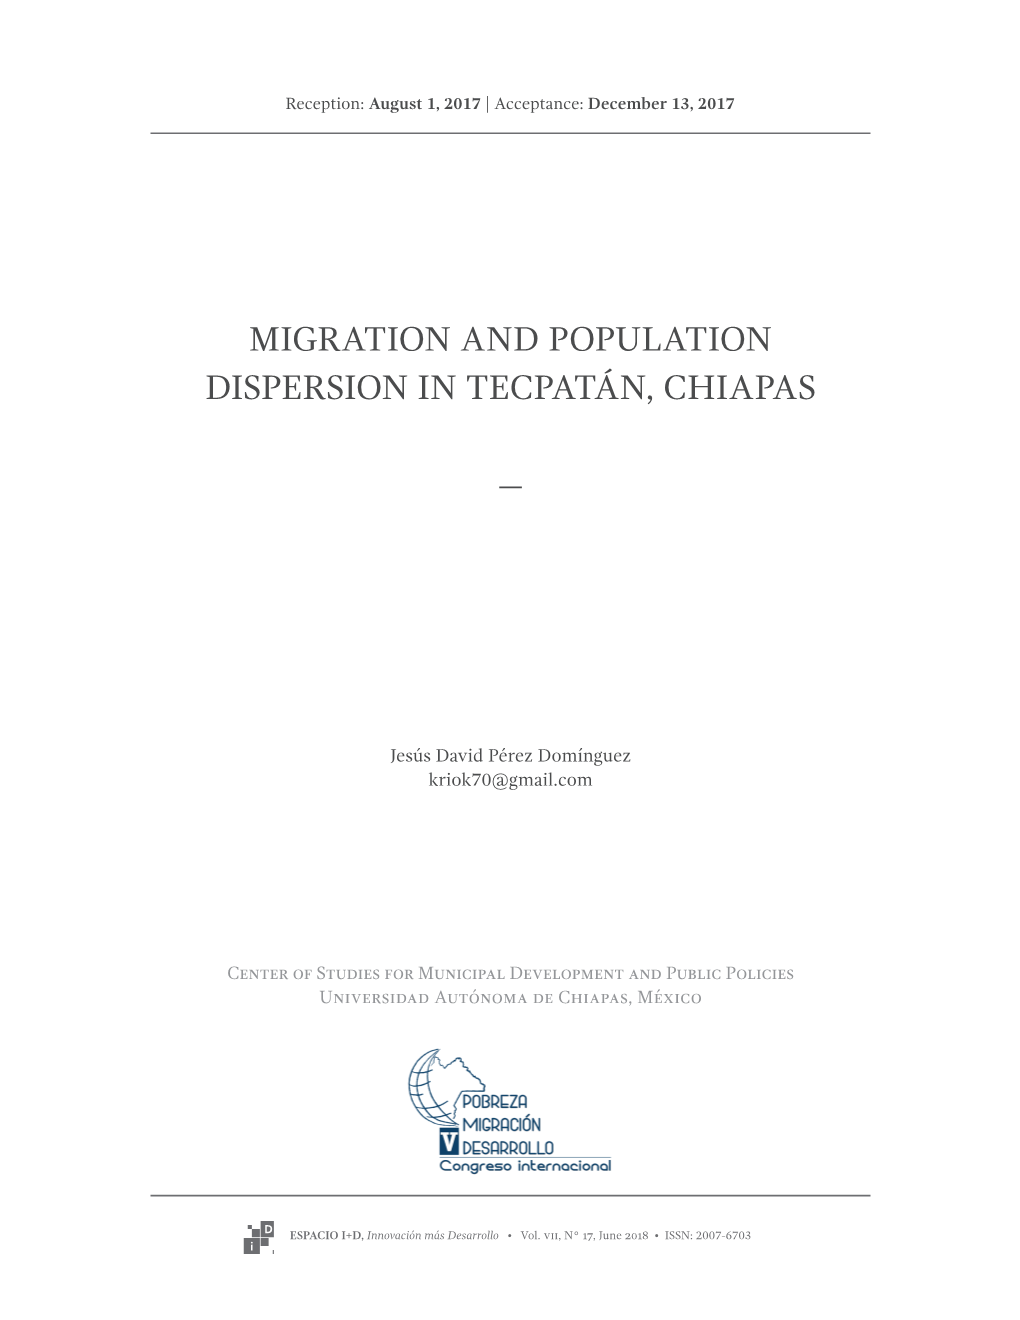 Migration and Population Dispersion in Tecpatán, Chiapas